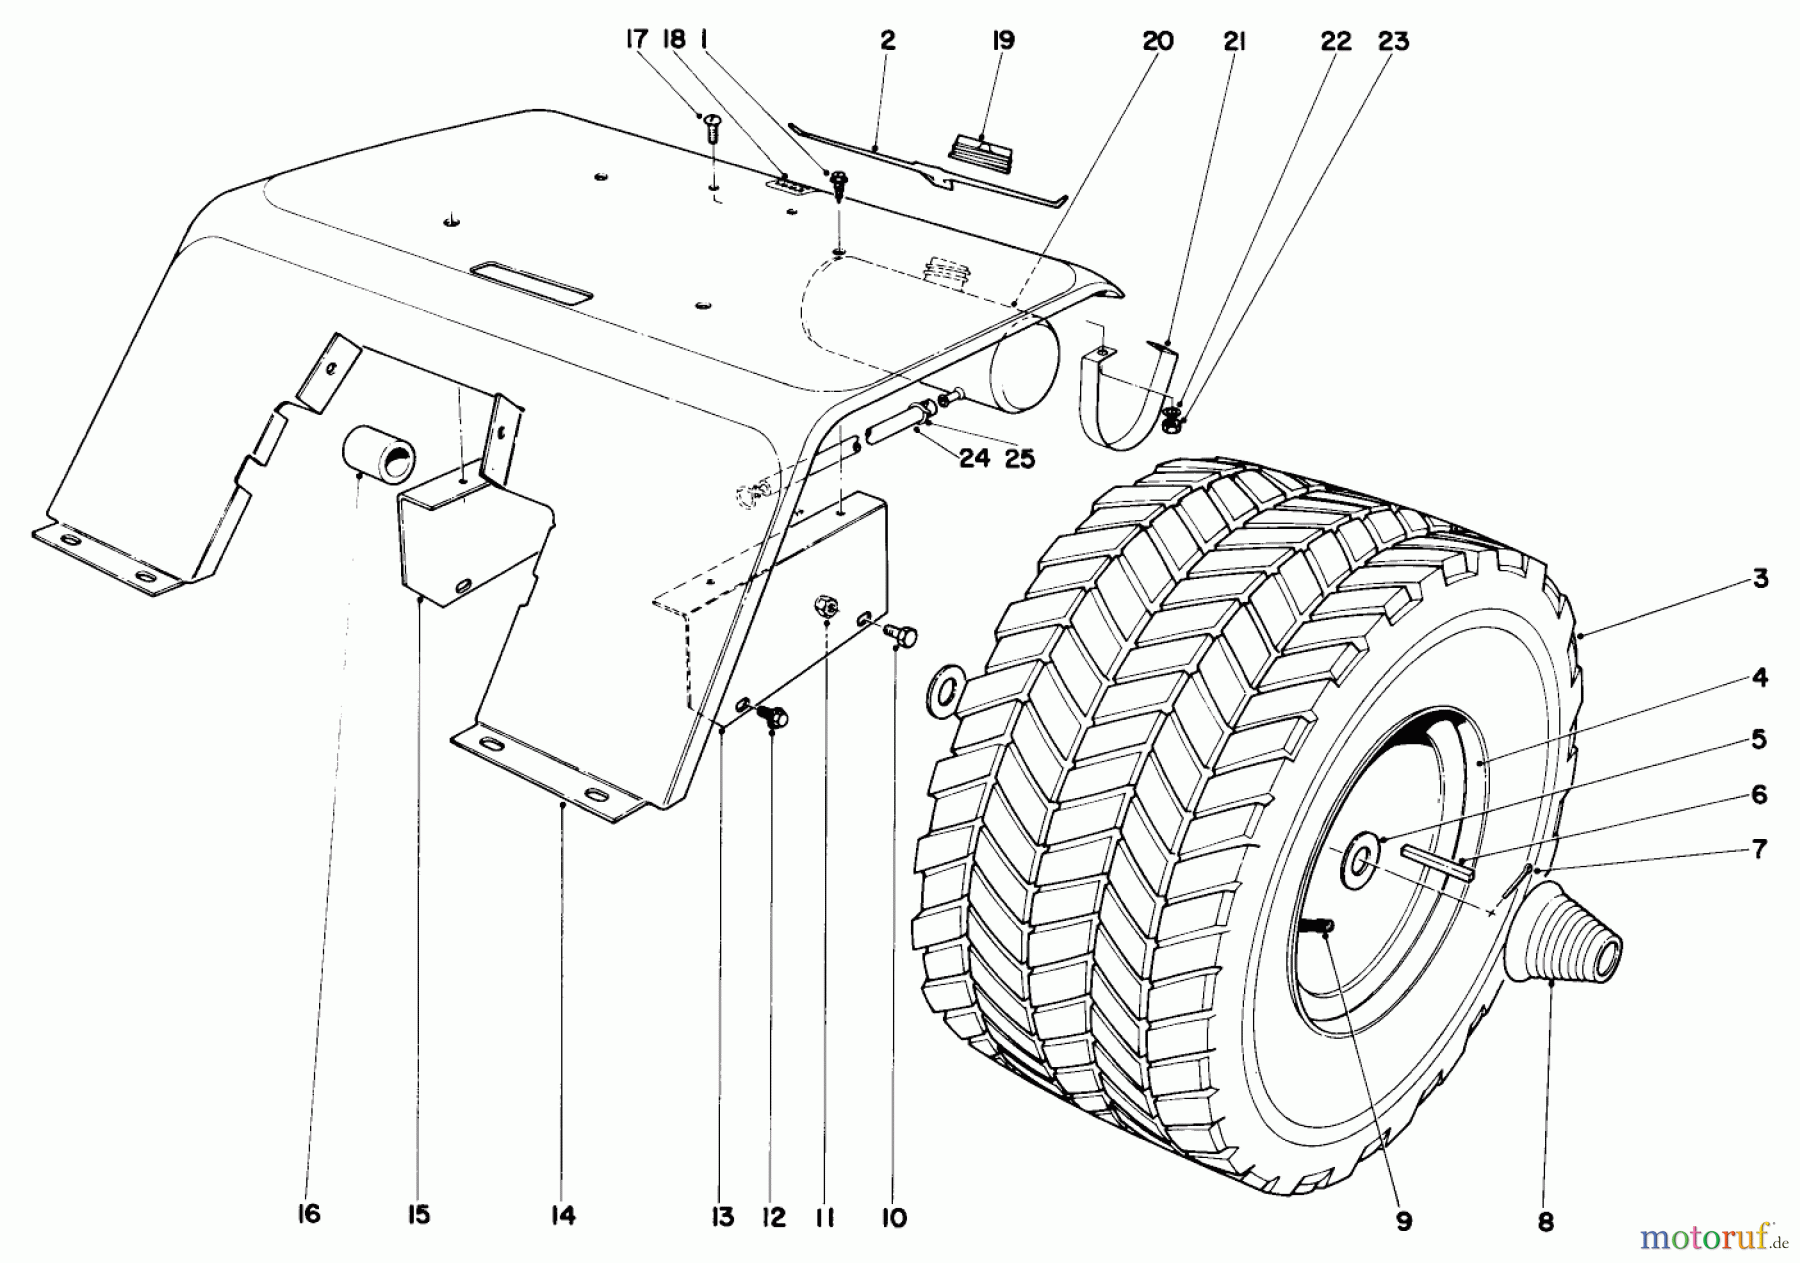  Toro Neu Mowers, Lawn & Garden Tractor Seite 1 55150 (940) - Toro 940 Electric Tractor, 1969 (9000001-9999999) 940 REAR TIRE AND FENDER ASSEMBLY